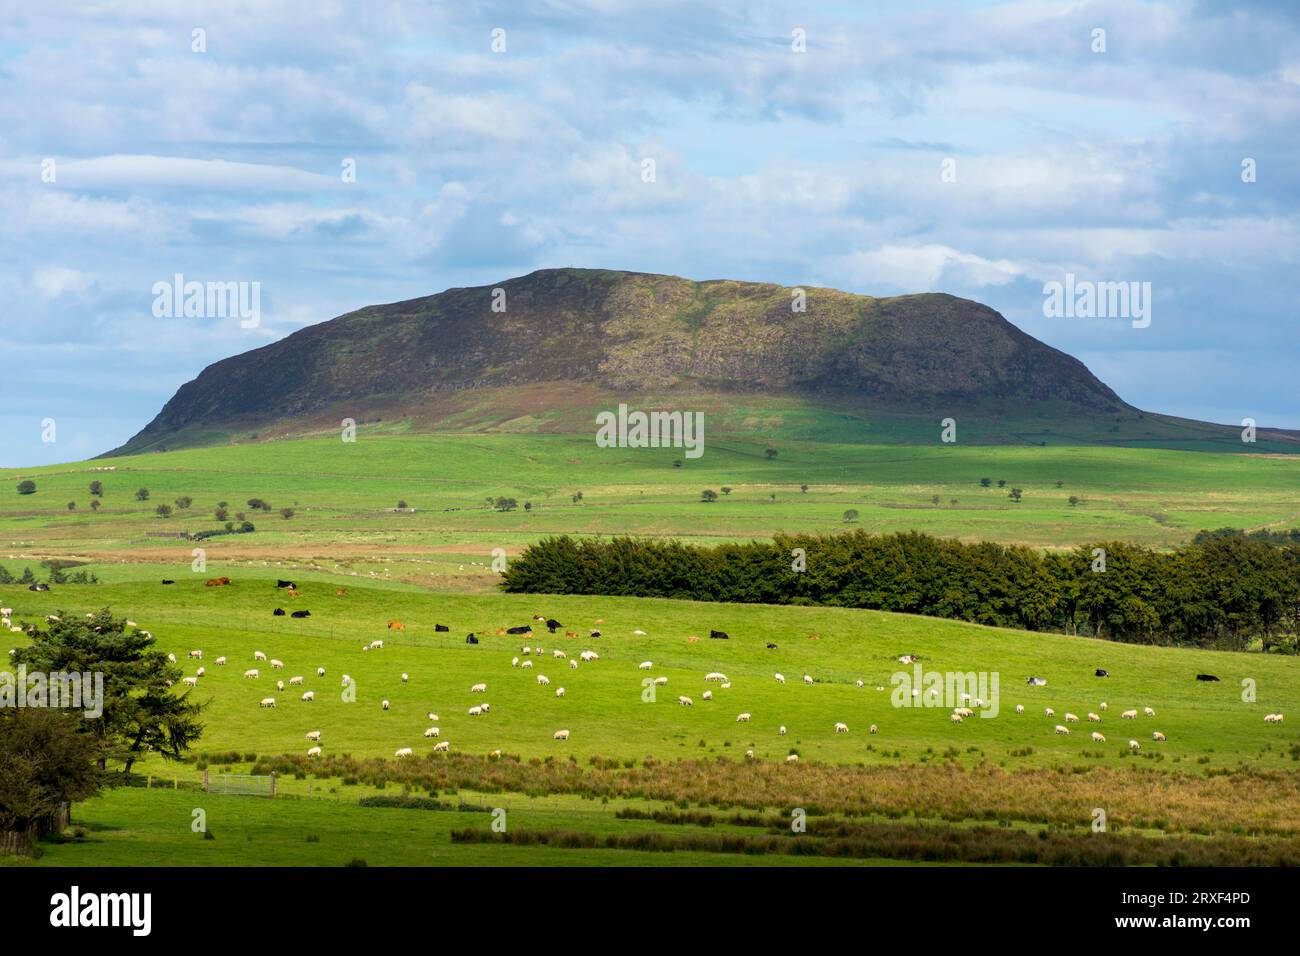 Slemish, historically called Slieve Mish, is a hill in County Antrim, Northern Ireland. It lies a few miles east of Ballymena. Stock Photo